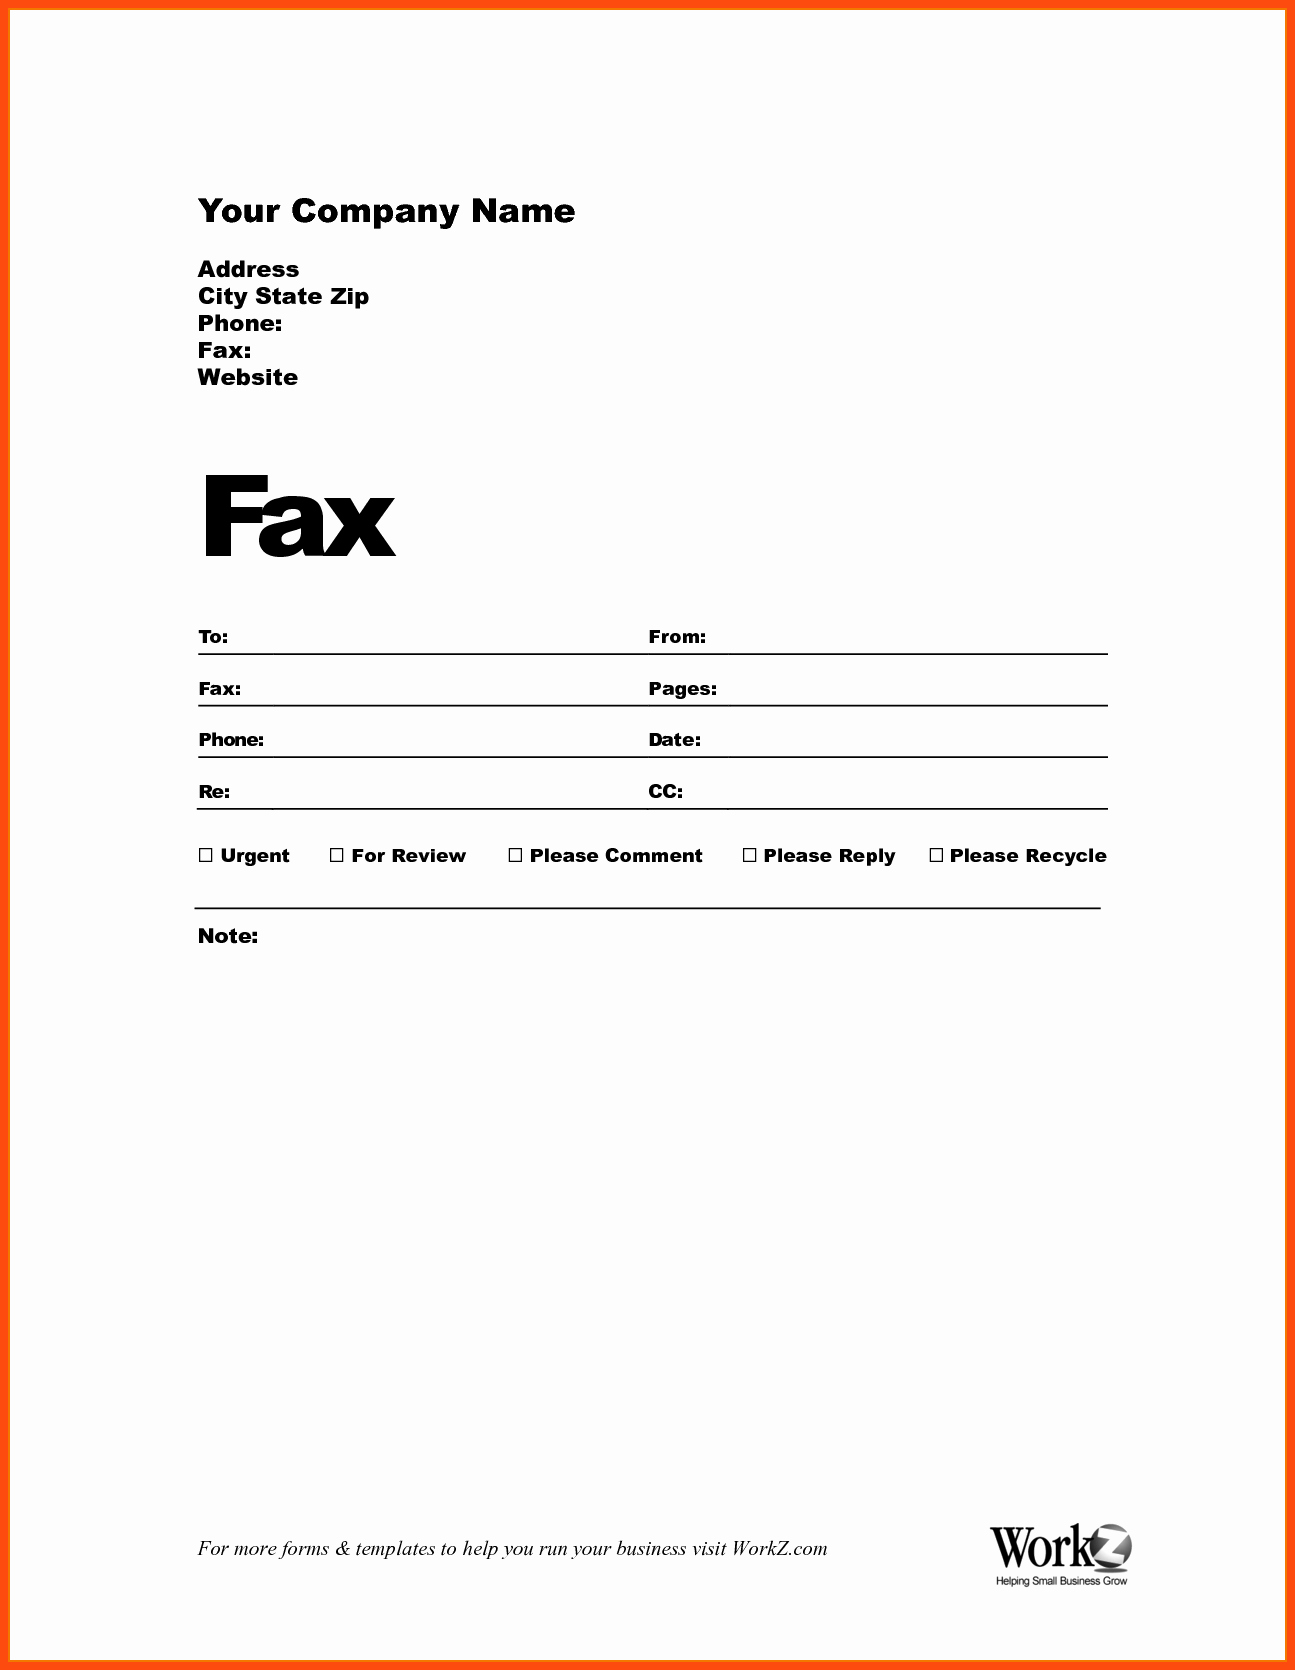 Microsoft Word Fax Cover Sheet Beautiful How to Fill Out A Fax Cover Sheet